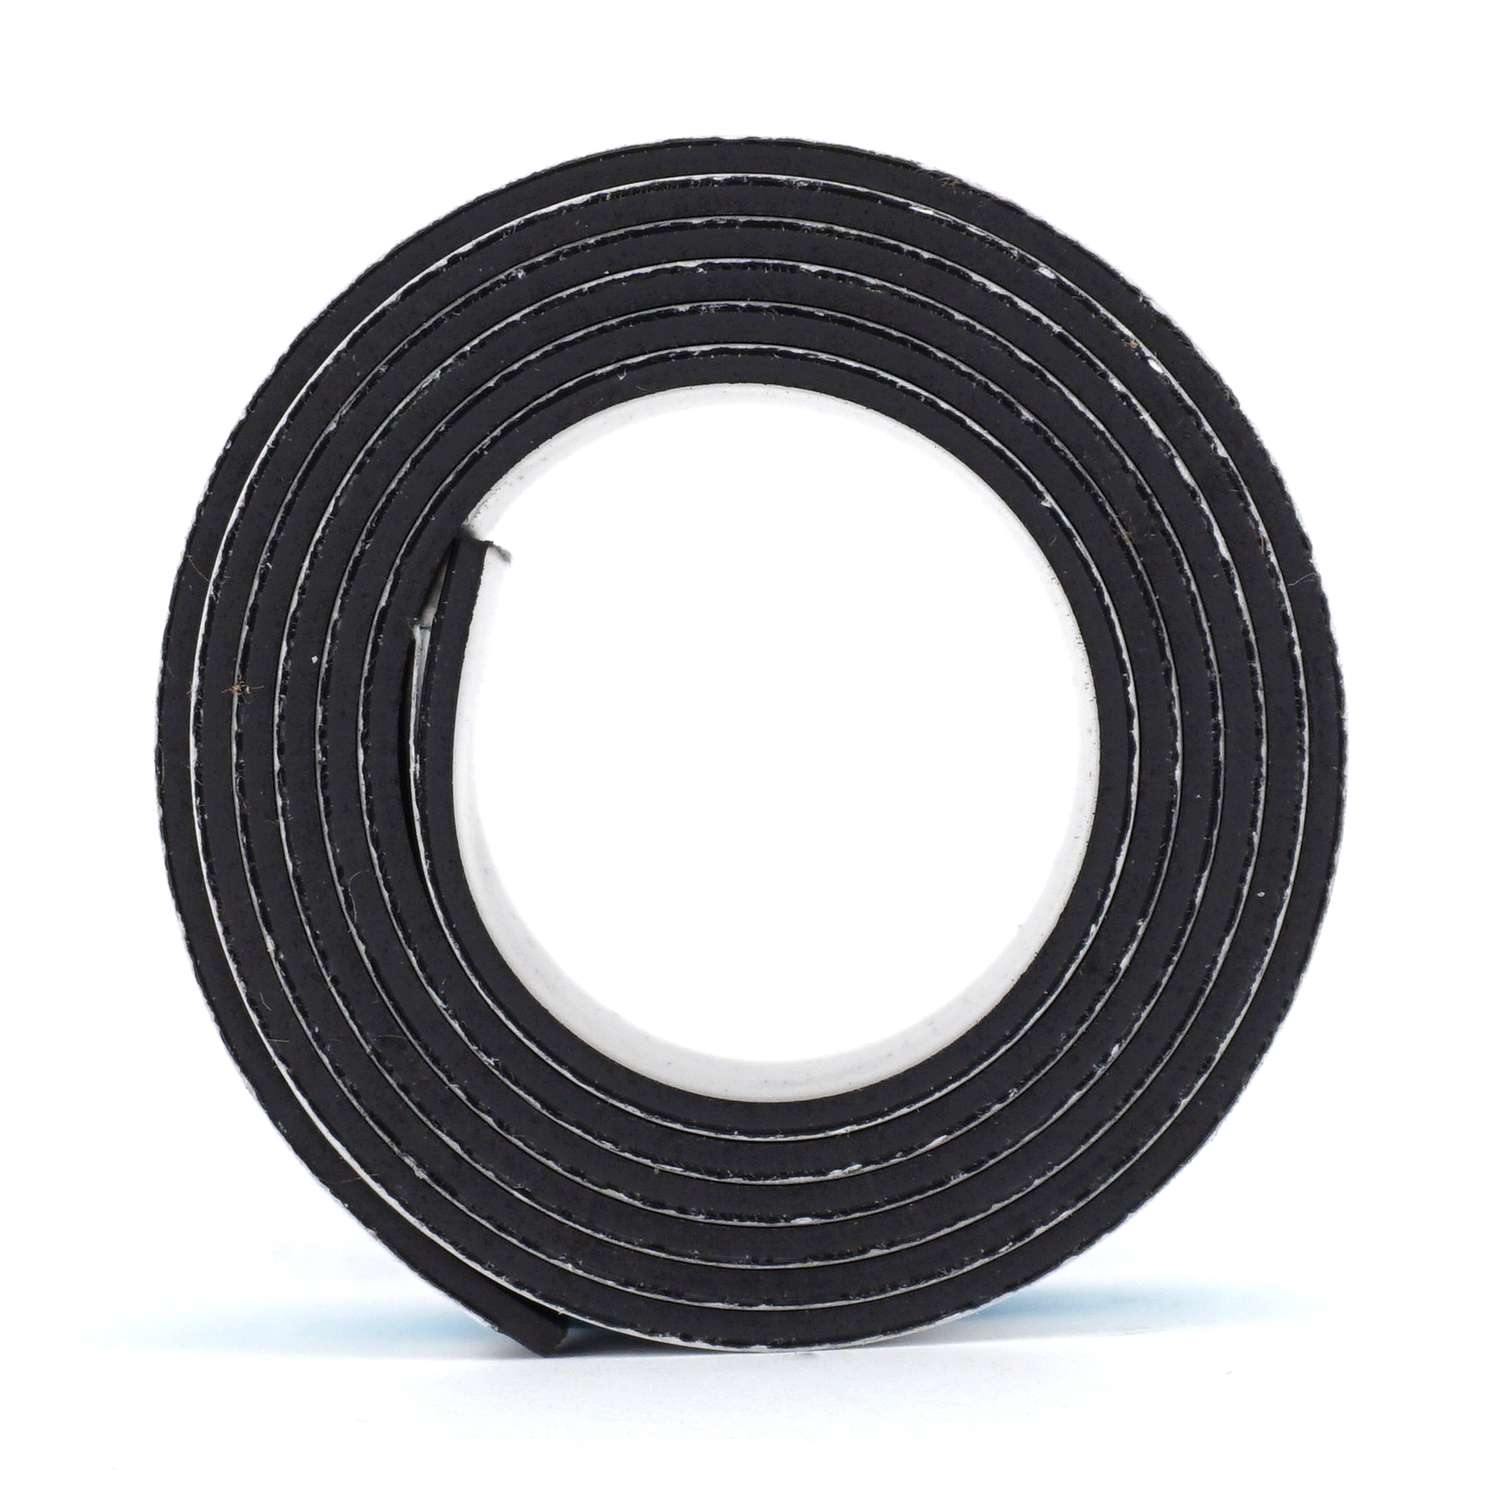 Shop 1 Magnet to Magnet Strips (Match Pole Set), ORDER TODAY, SHIPS  TODAY!